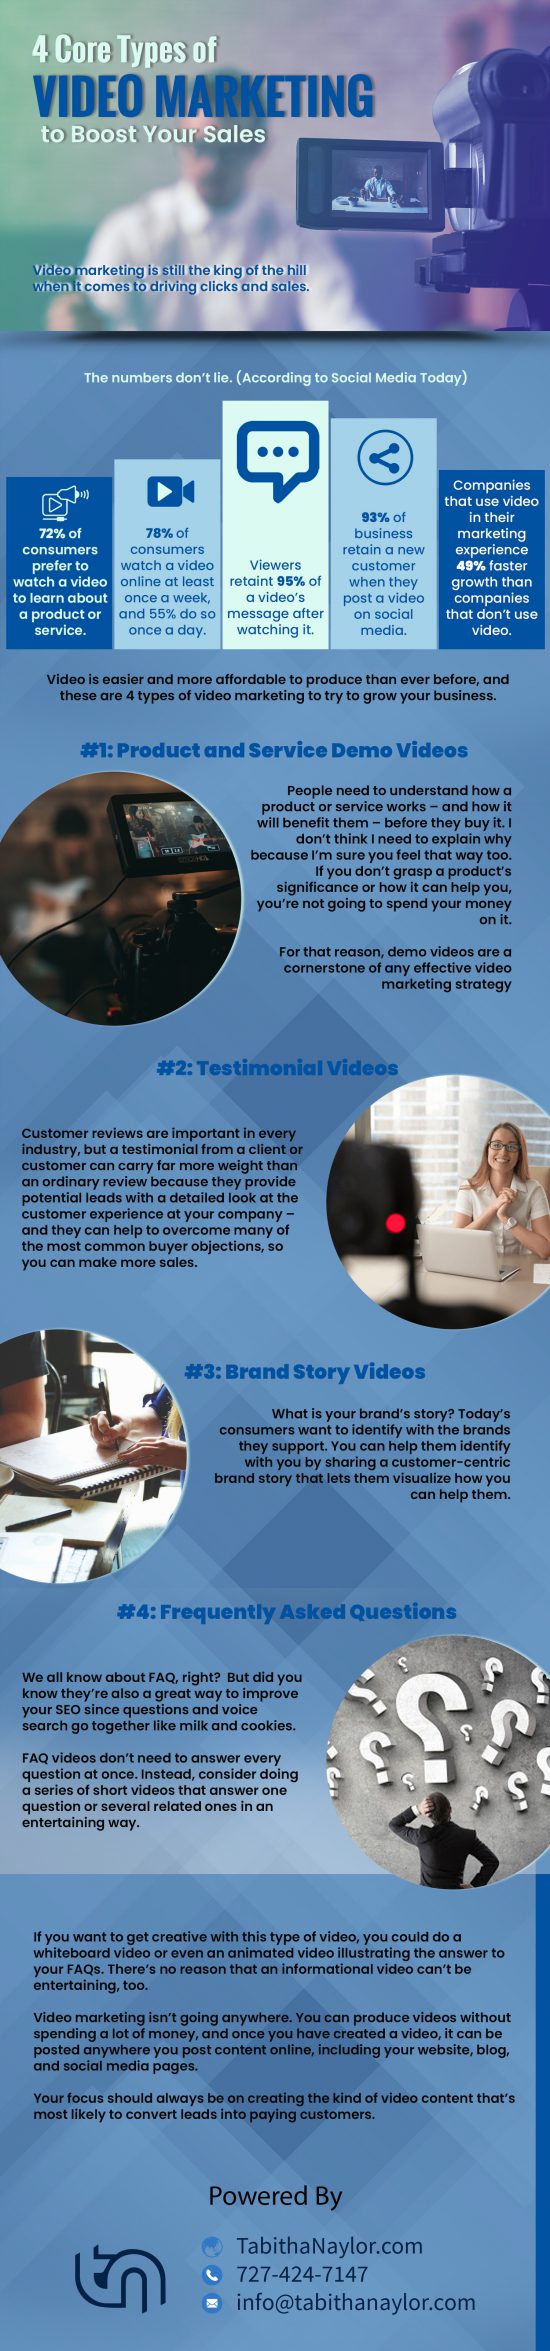 4-Core-Types-of-Video-Marketing-to-Boost-Your-Sales-550x2351 